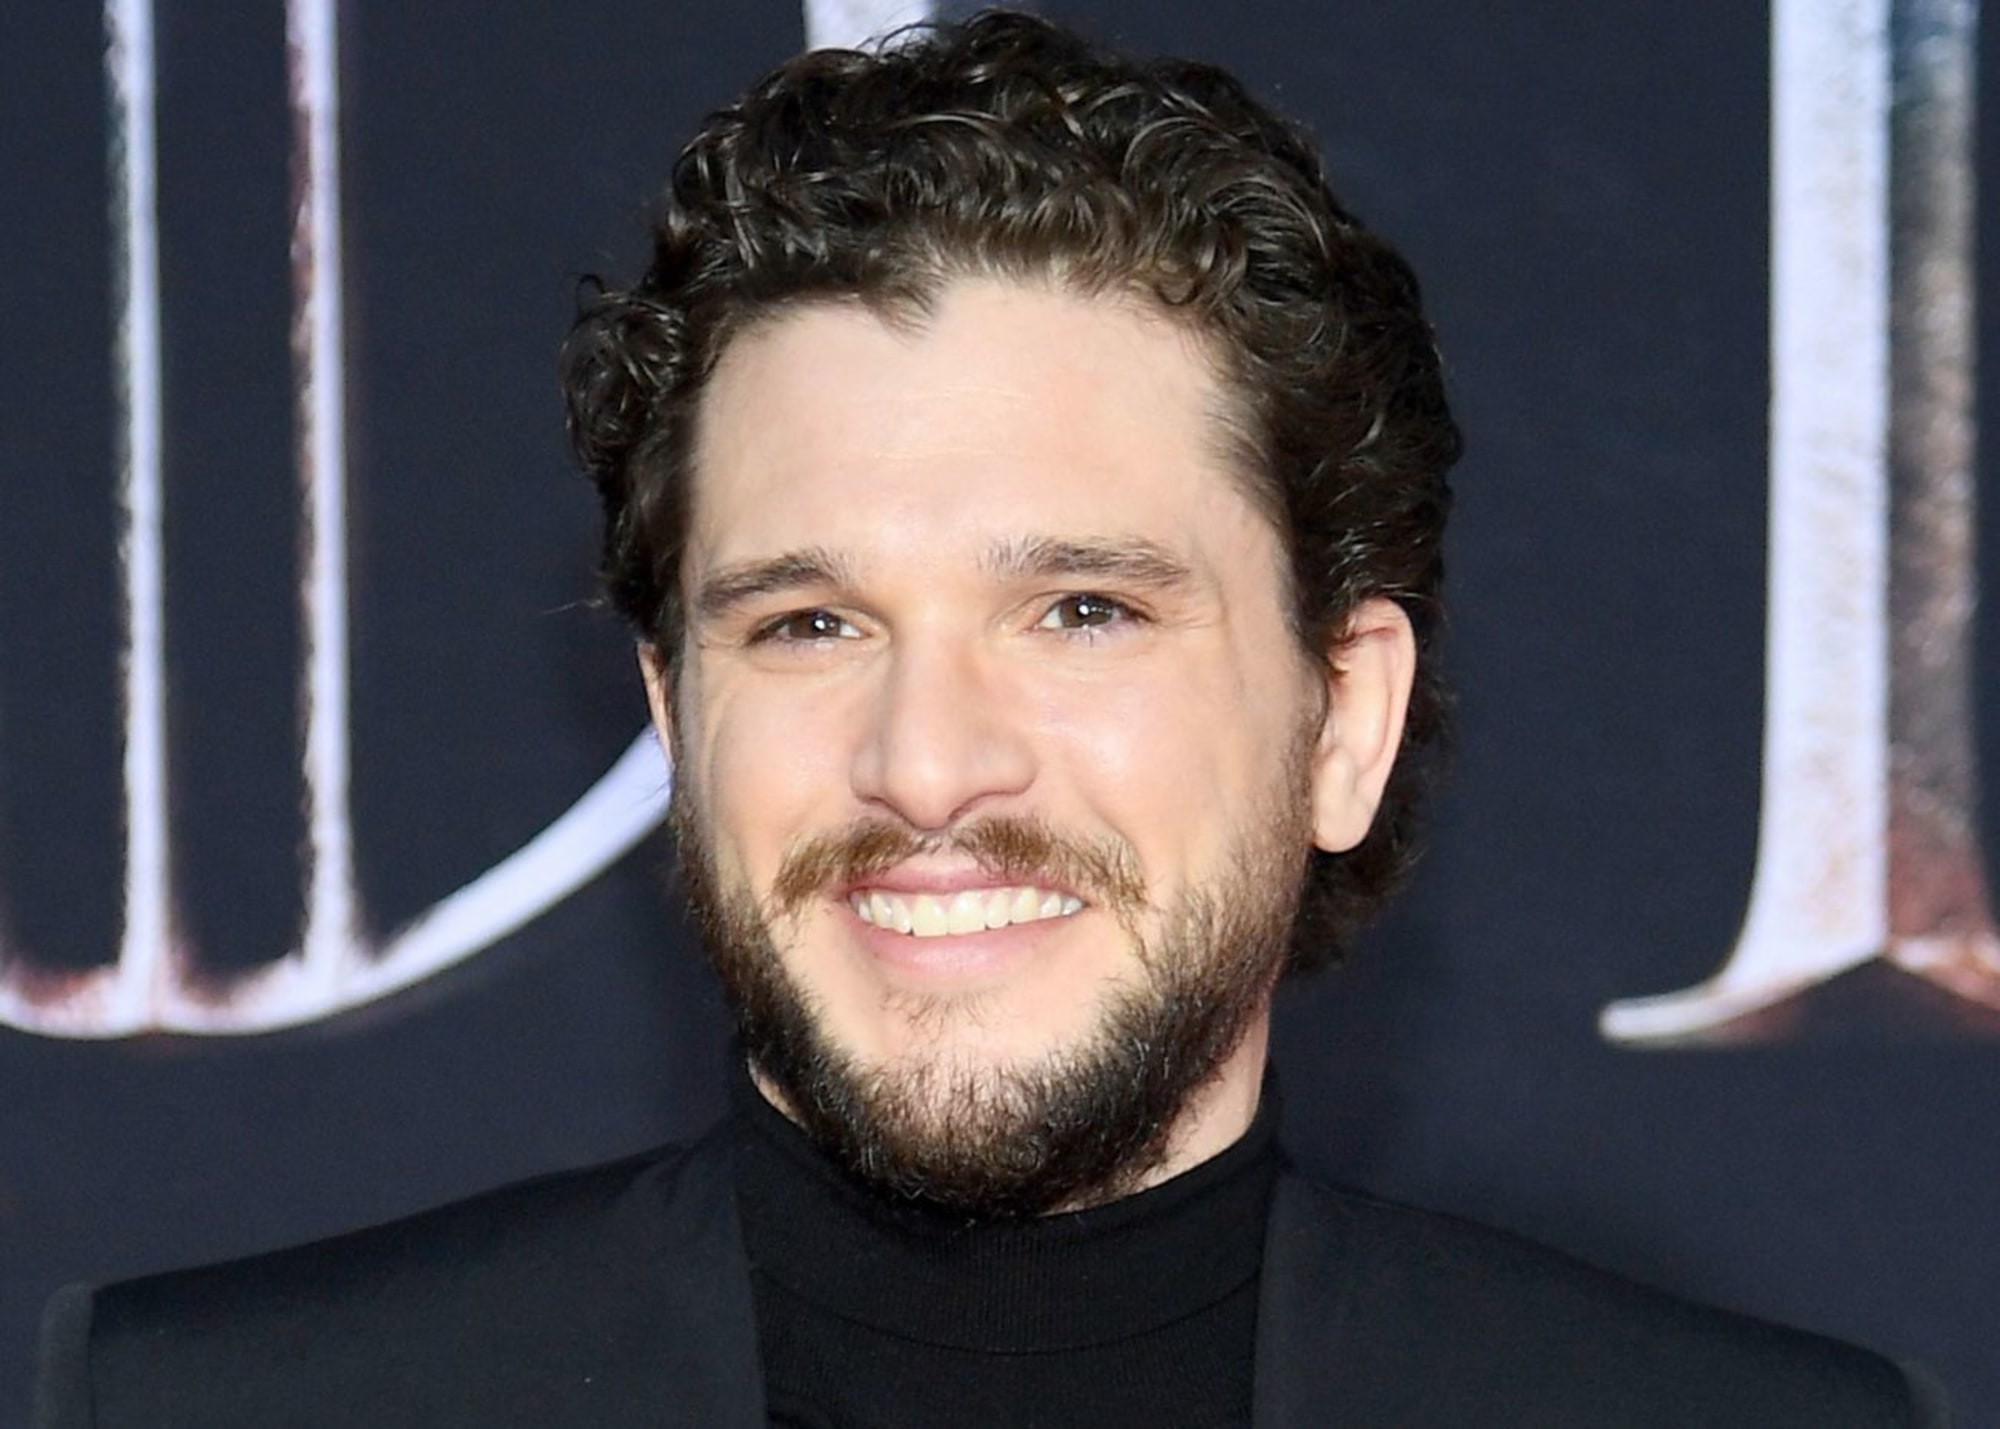 Kit Harington brings his American accent as host of Saturday Night Live